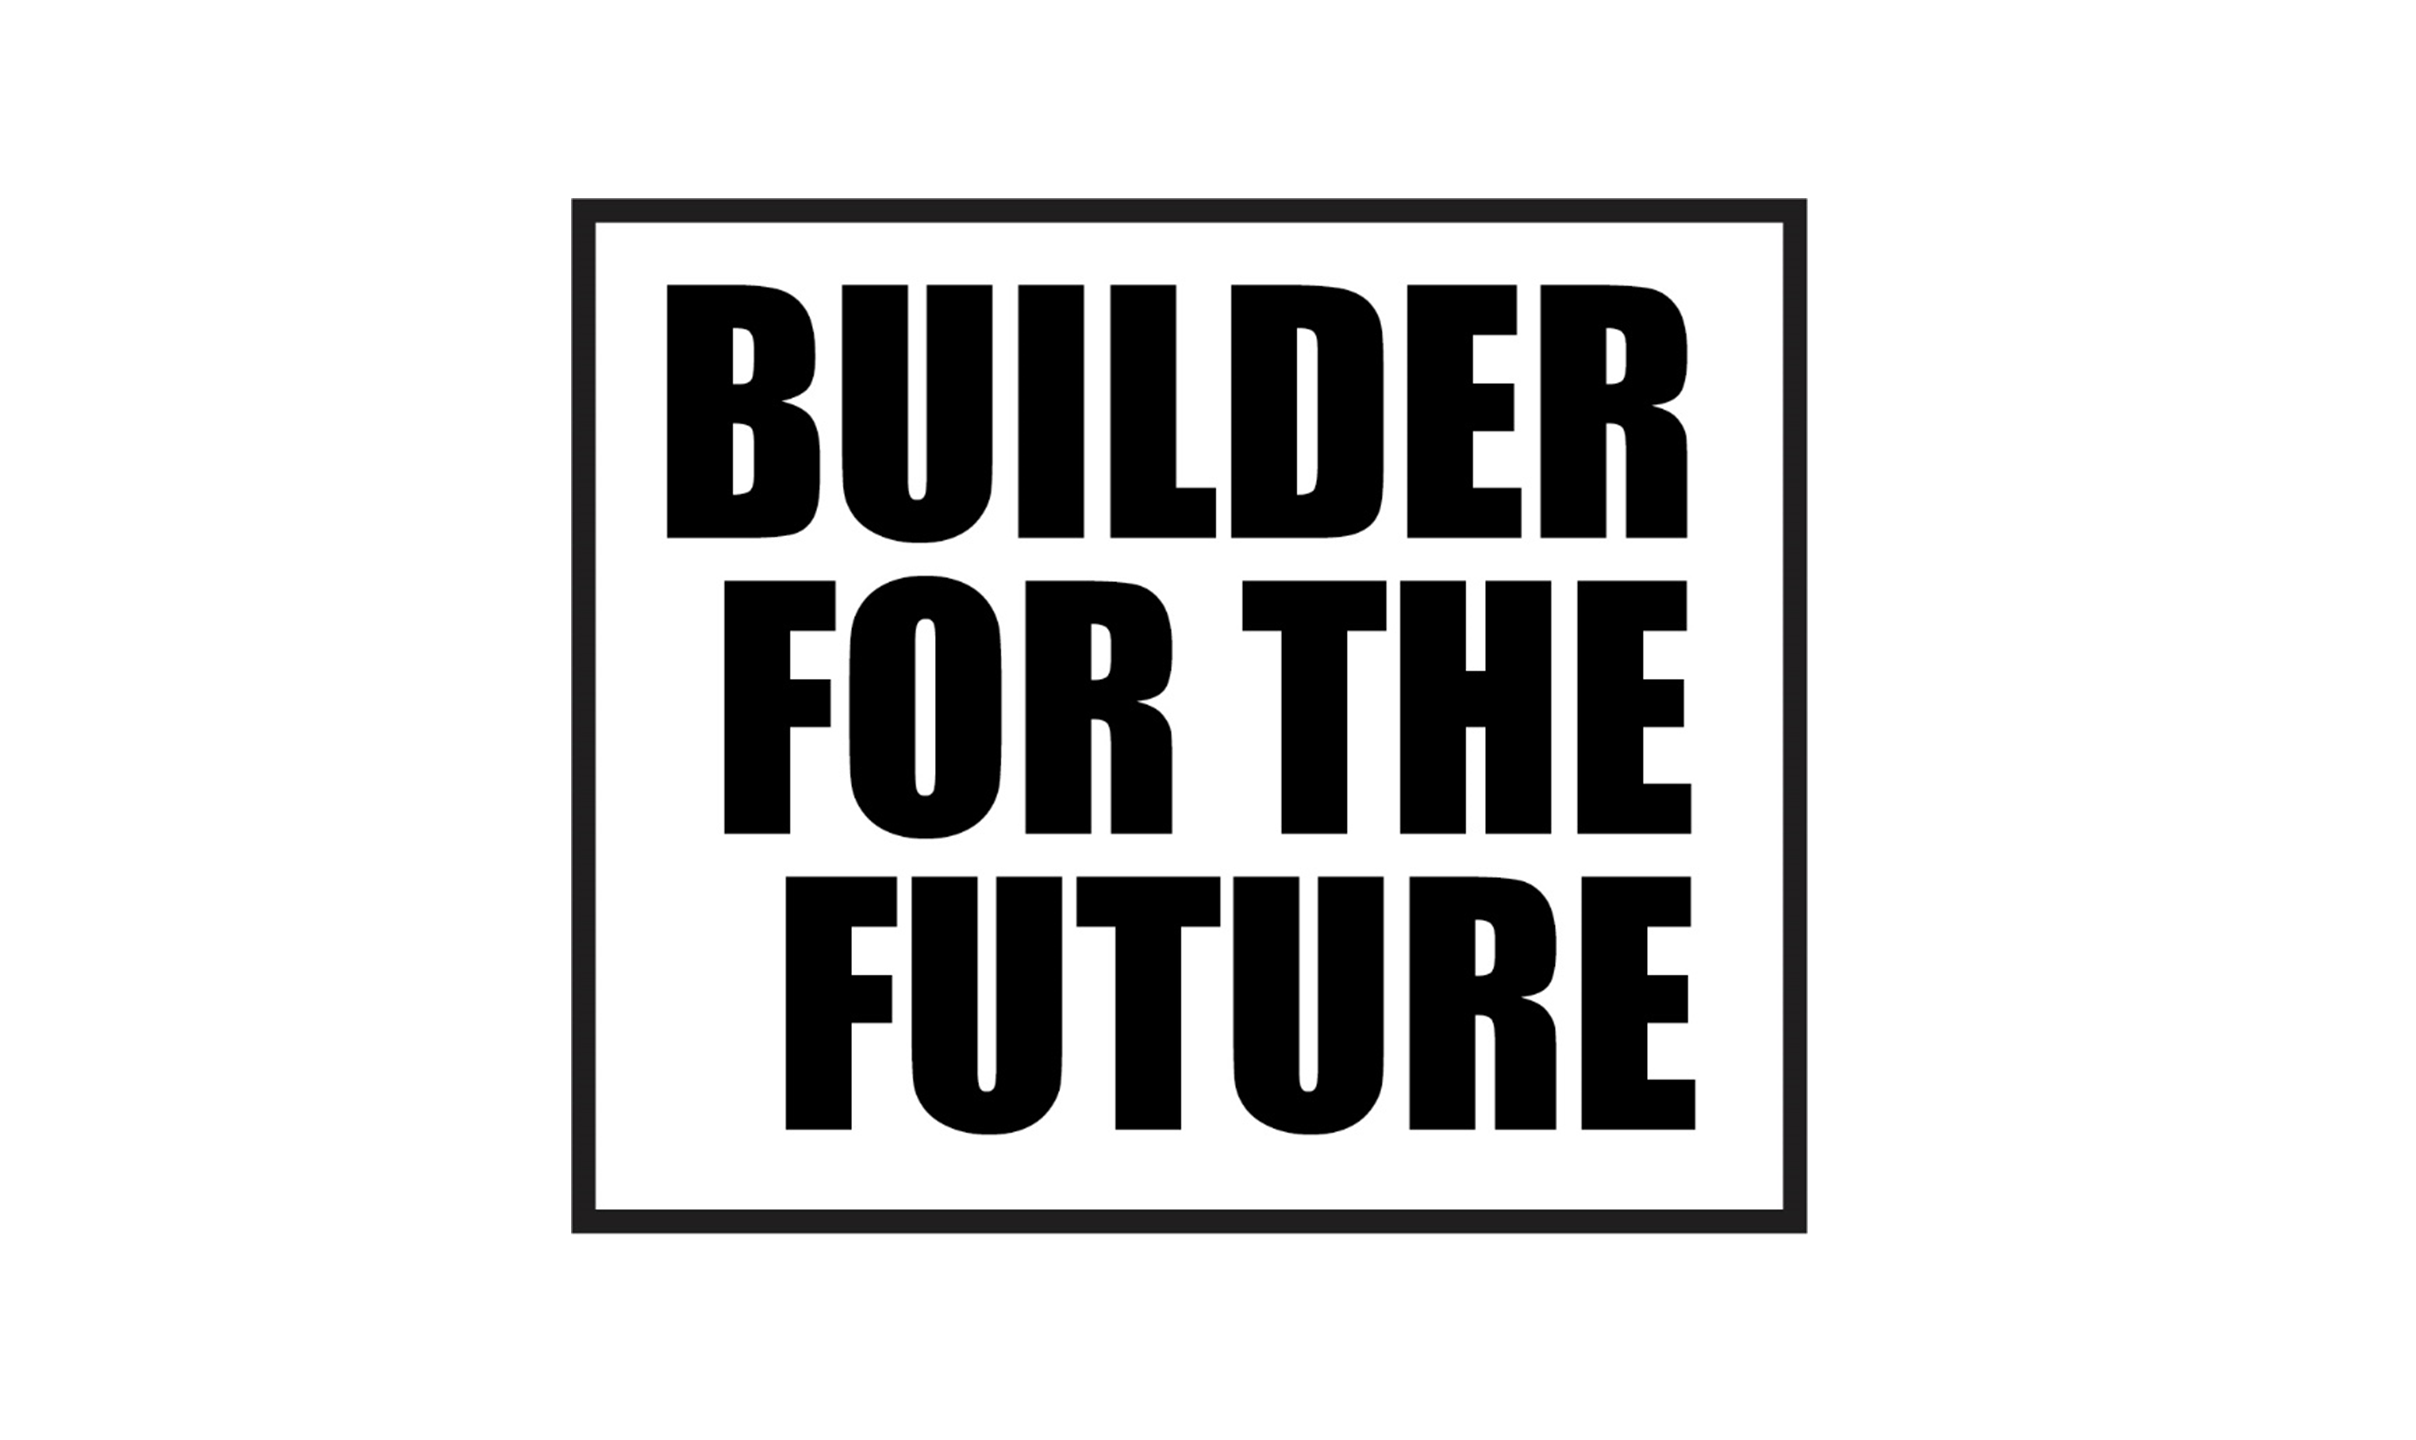 BUILDER FOR THE FUTURE